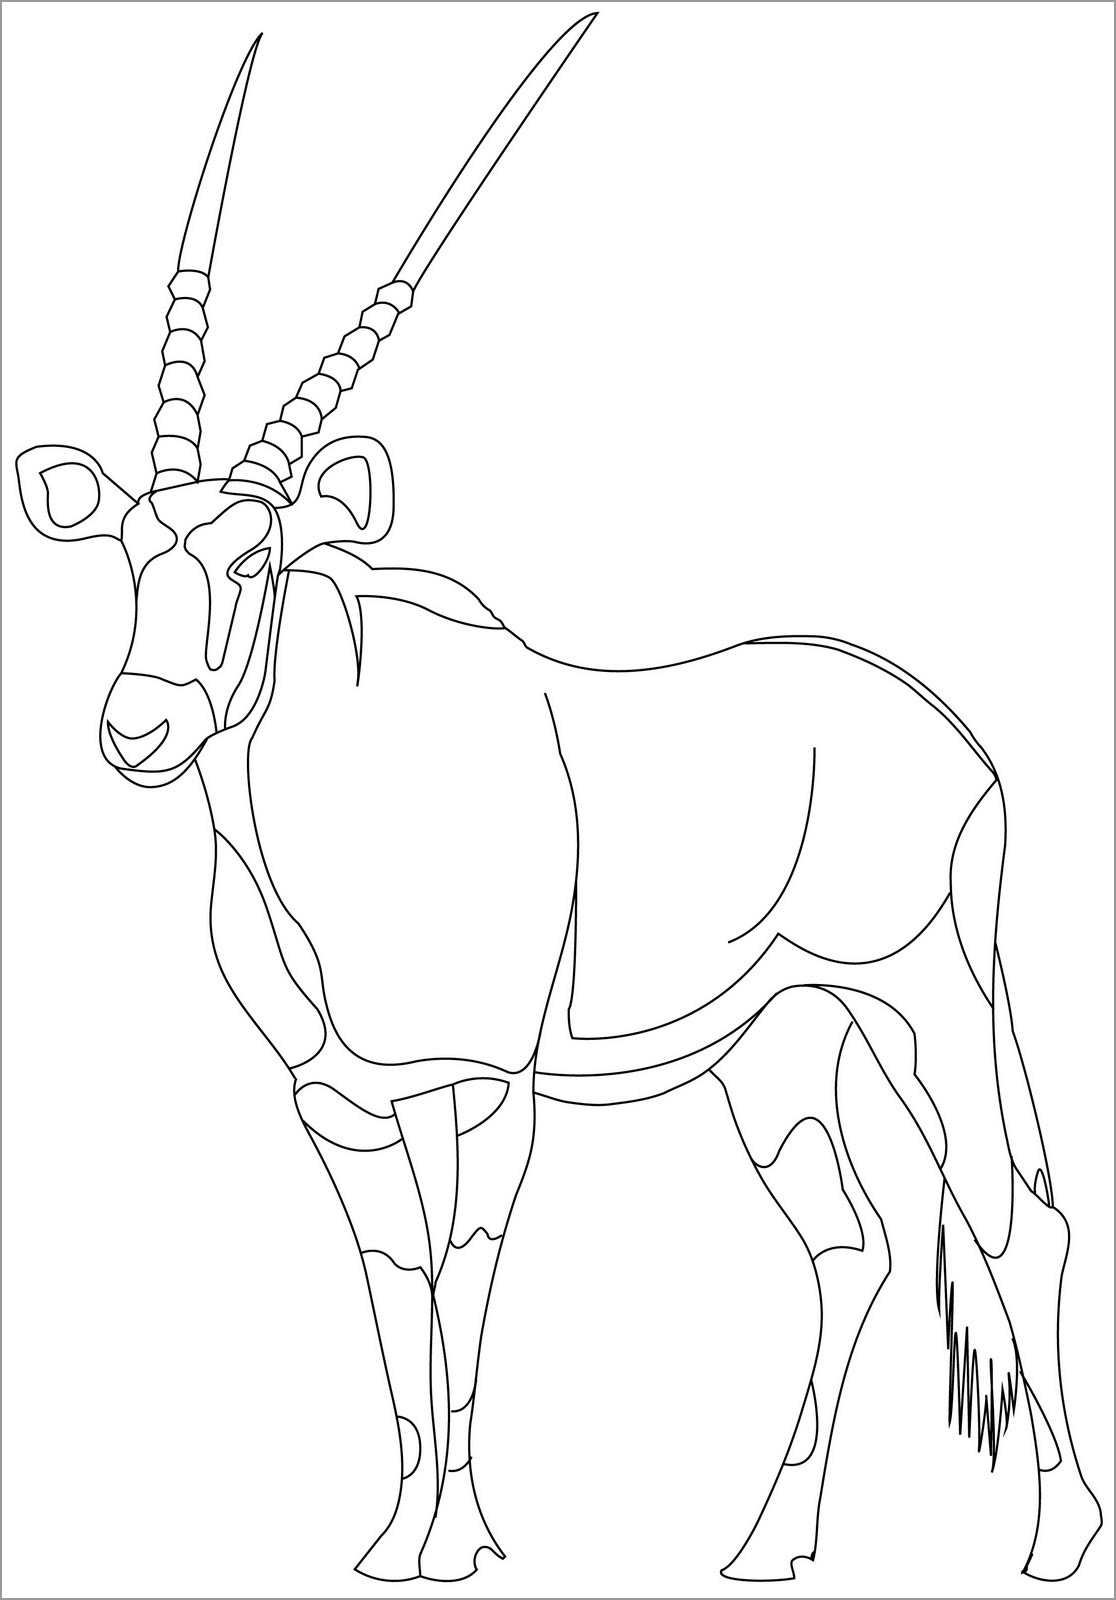 Pronghorn Antelope Coloring Pages